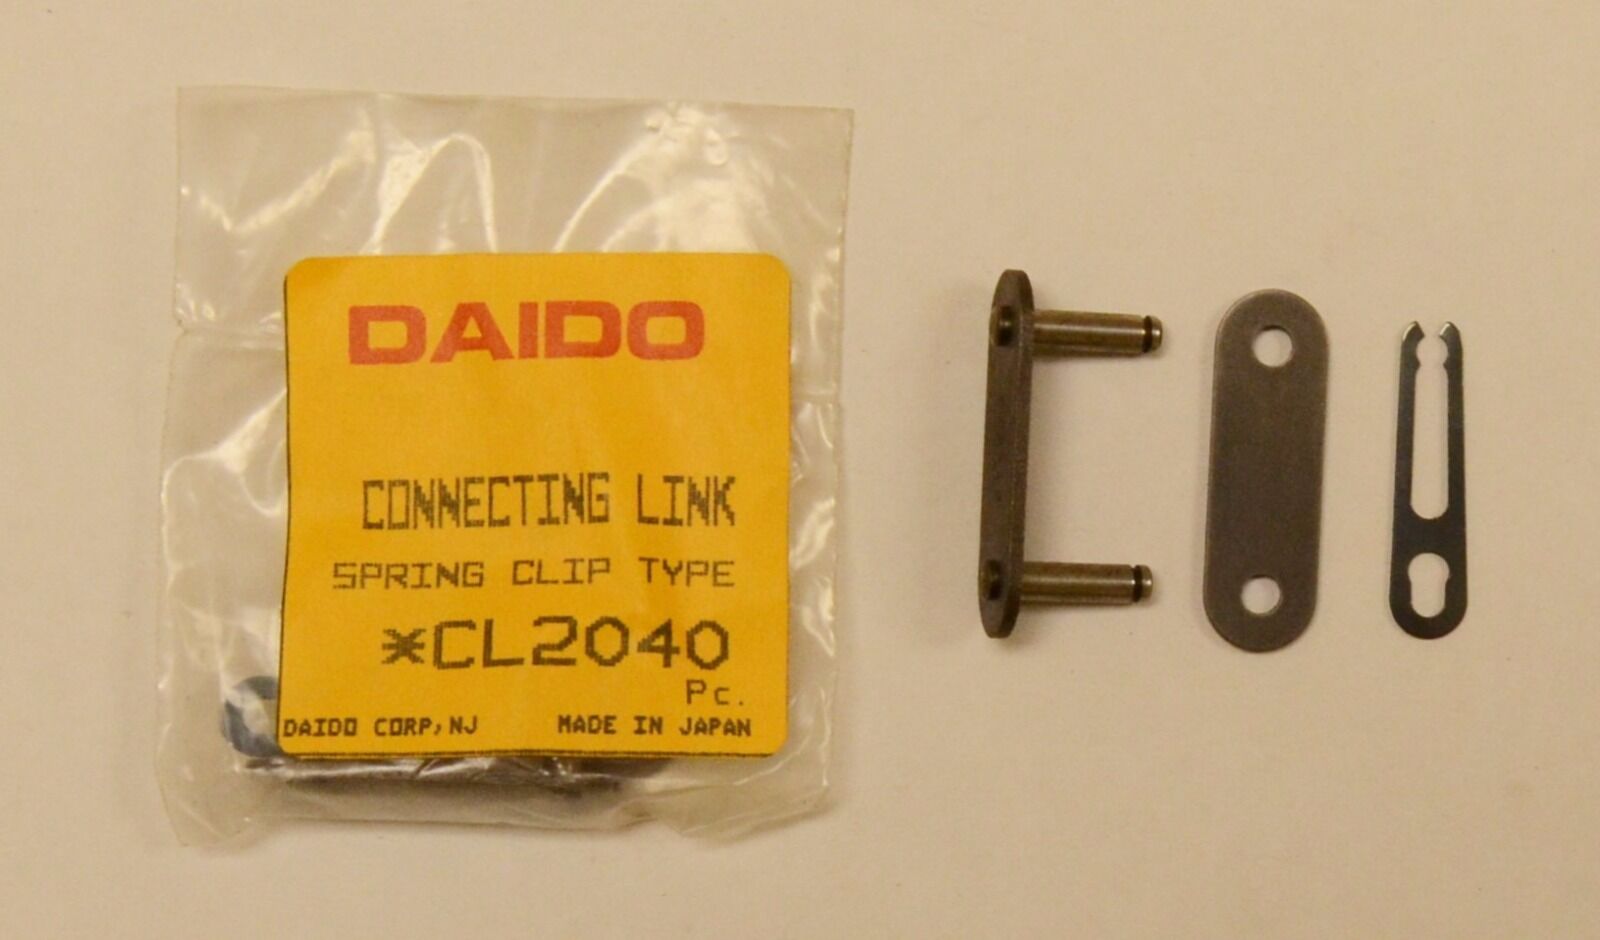 Lot of 5 ~Daido Connecting Links, Double Pitch, Conveyor, Steel, Ind. No. CL2040